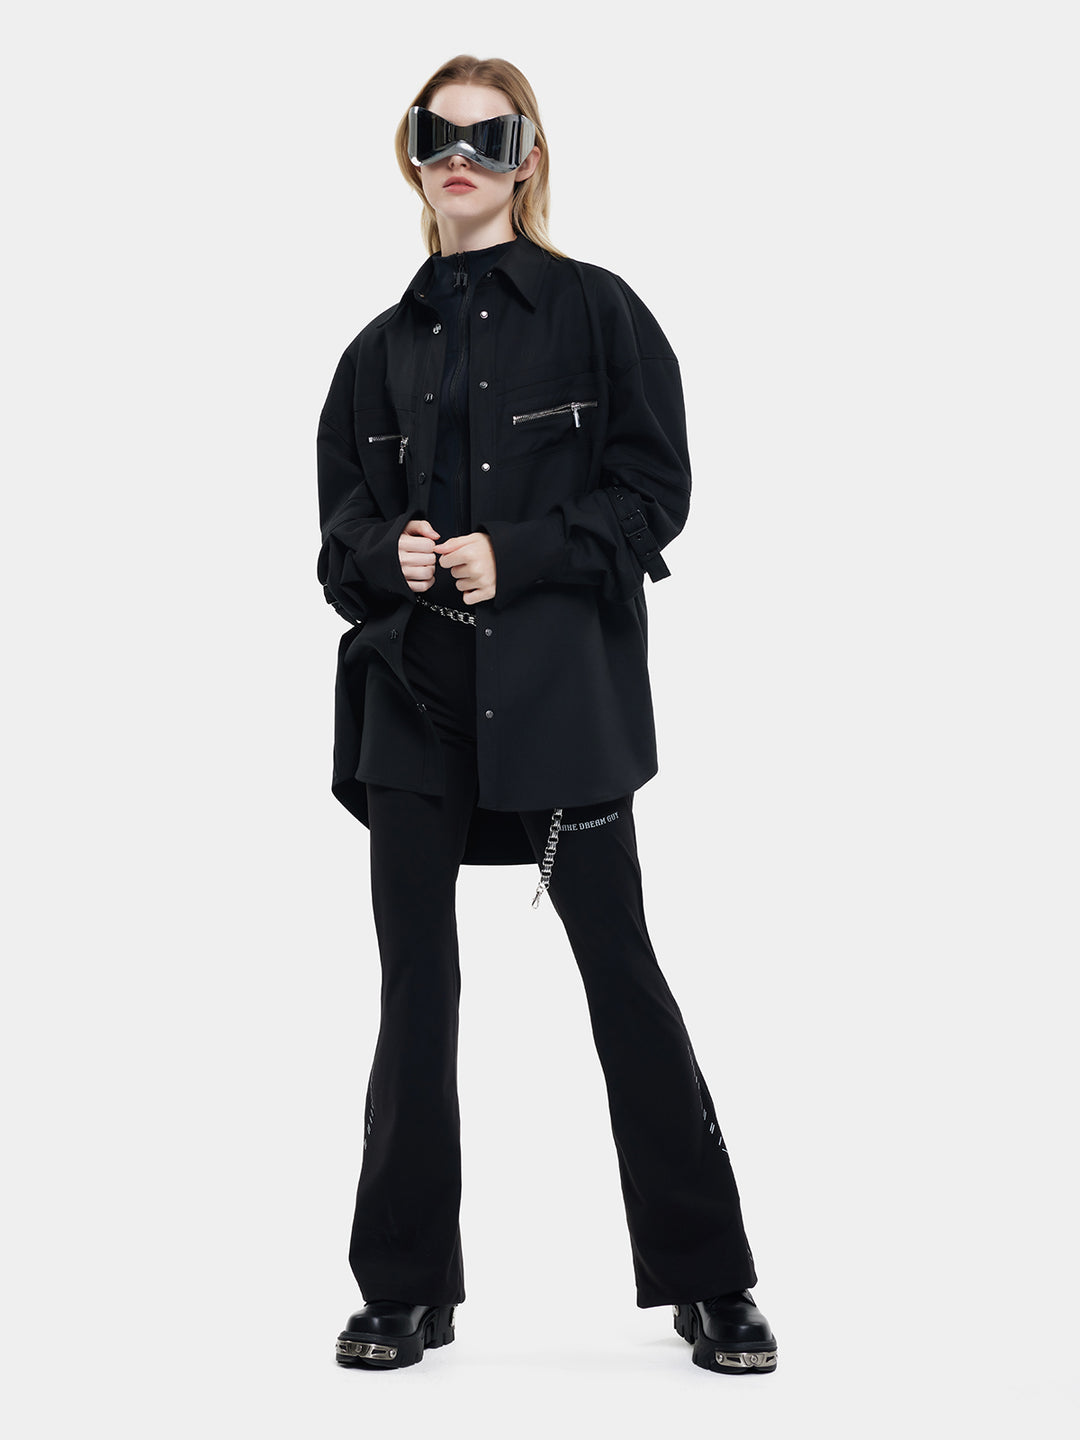 T-one Solid Buckle Decor Long Sleeve Jacket-Black